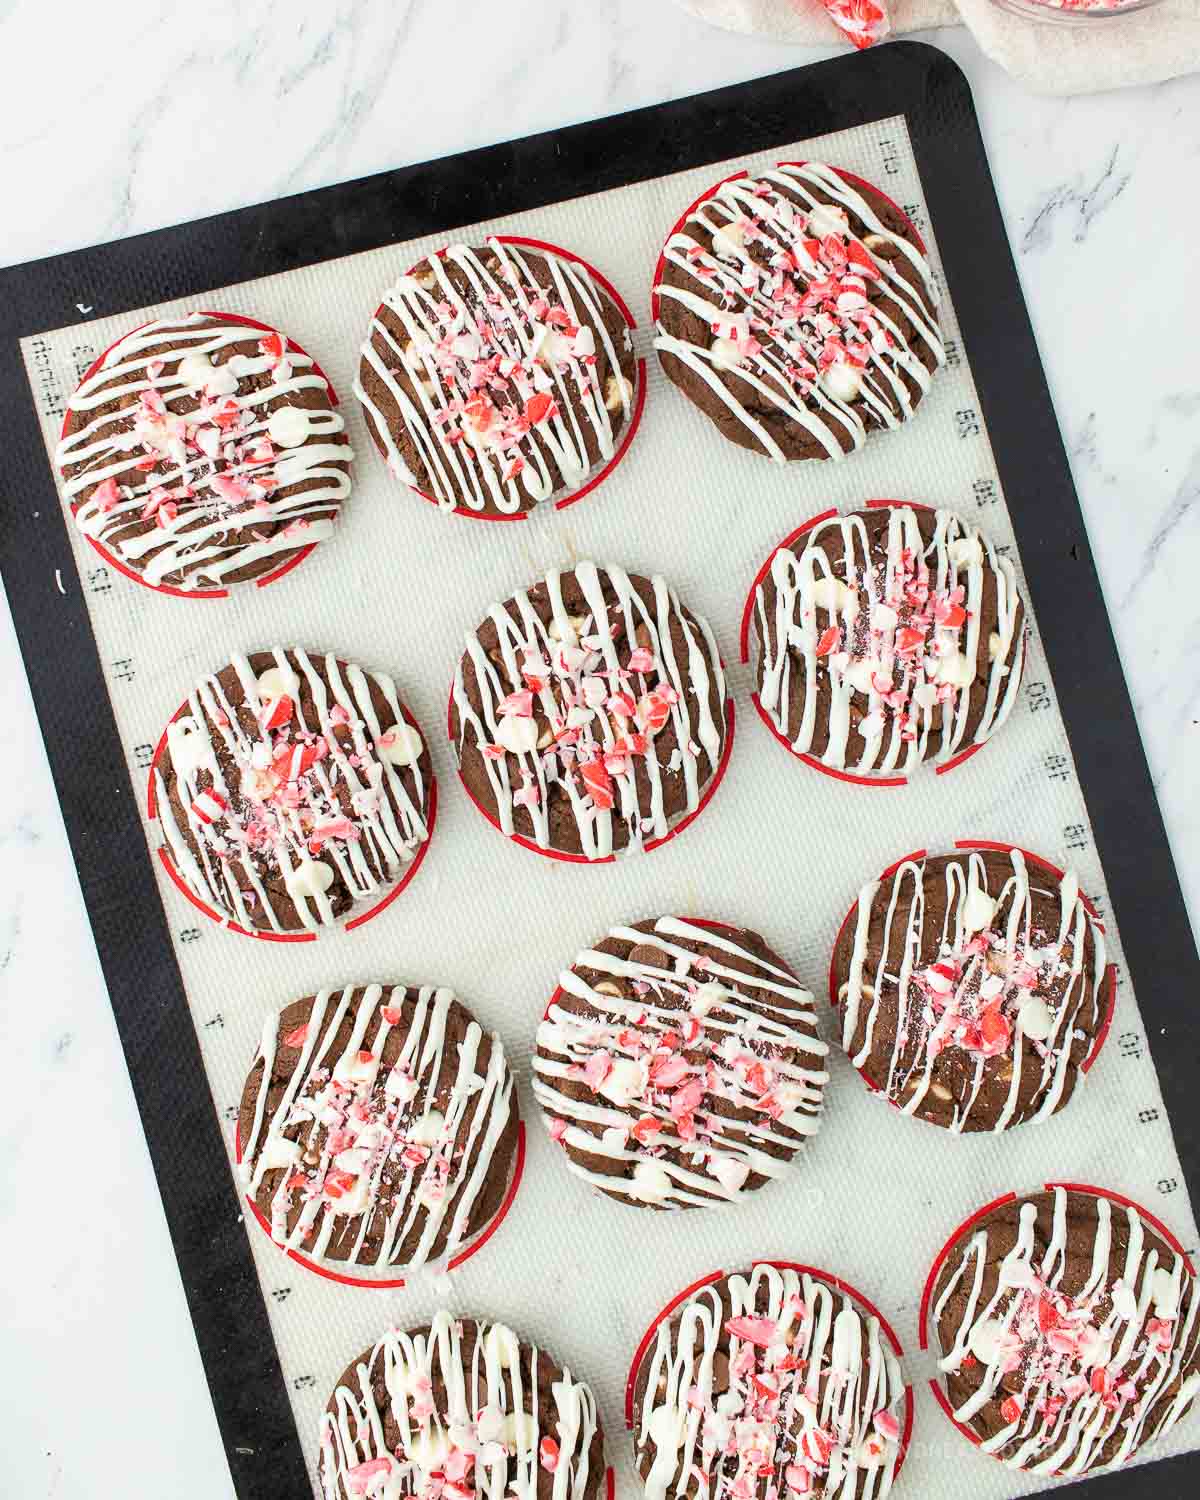 Finished cookies with white chocolate drizzle and crunched up peppermint bark.